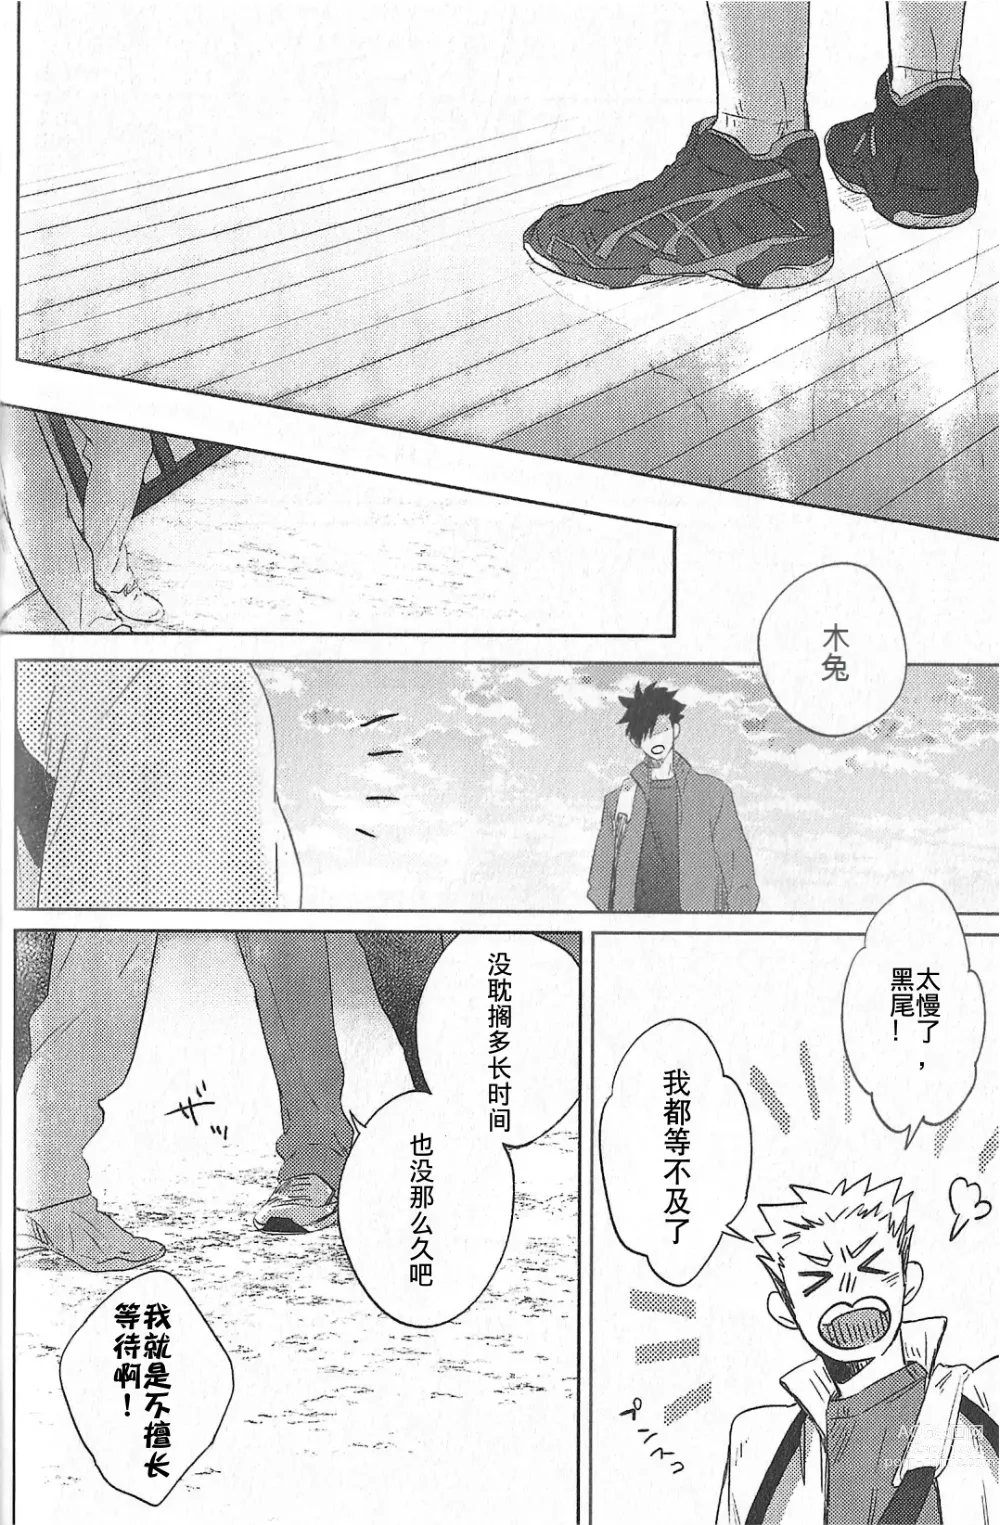 Page 5 of doujinshi 极境的野兽 后篇